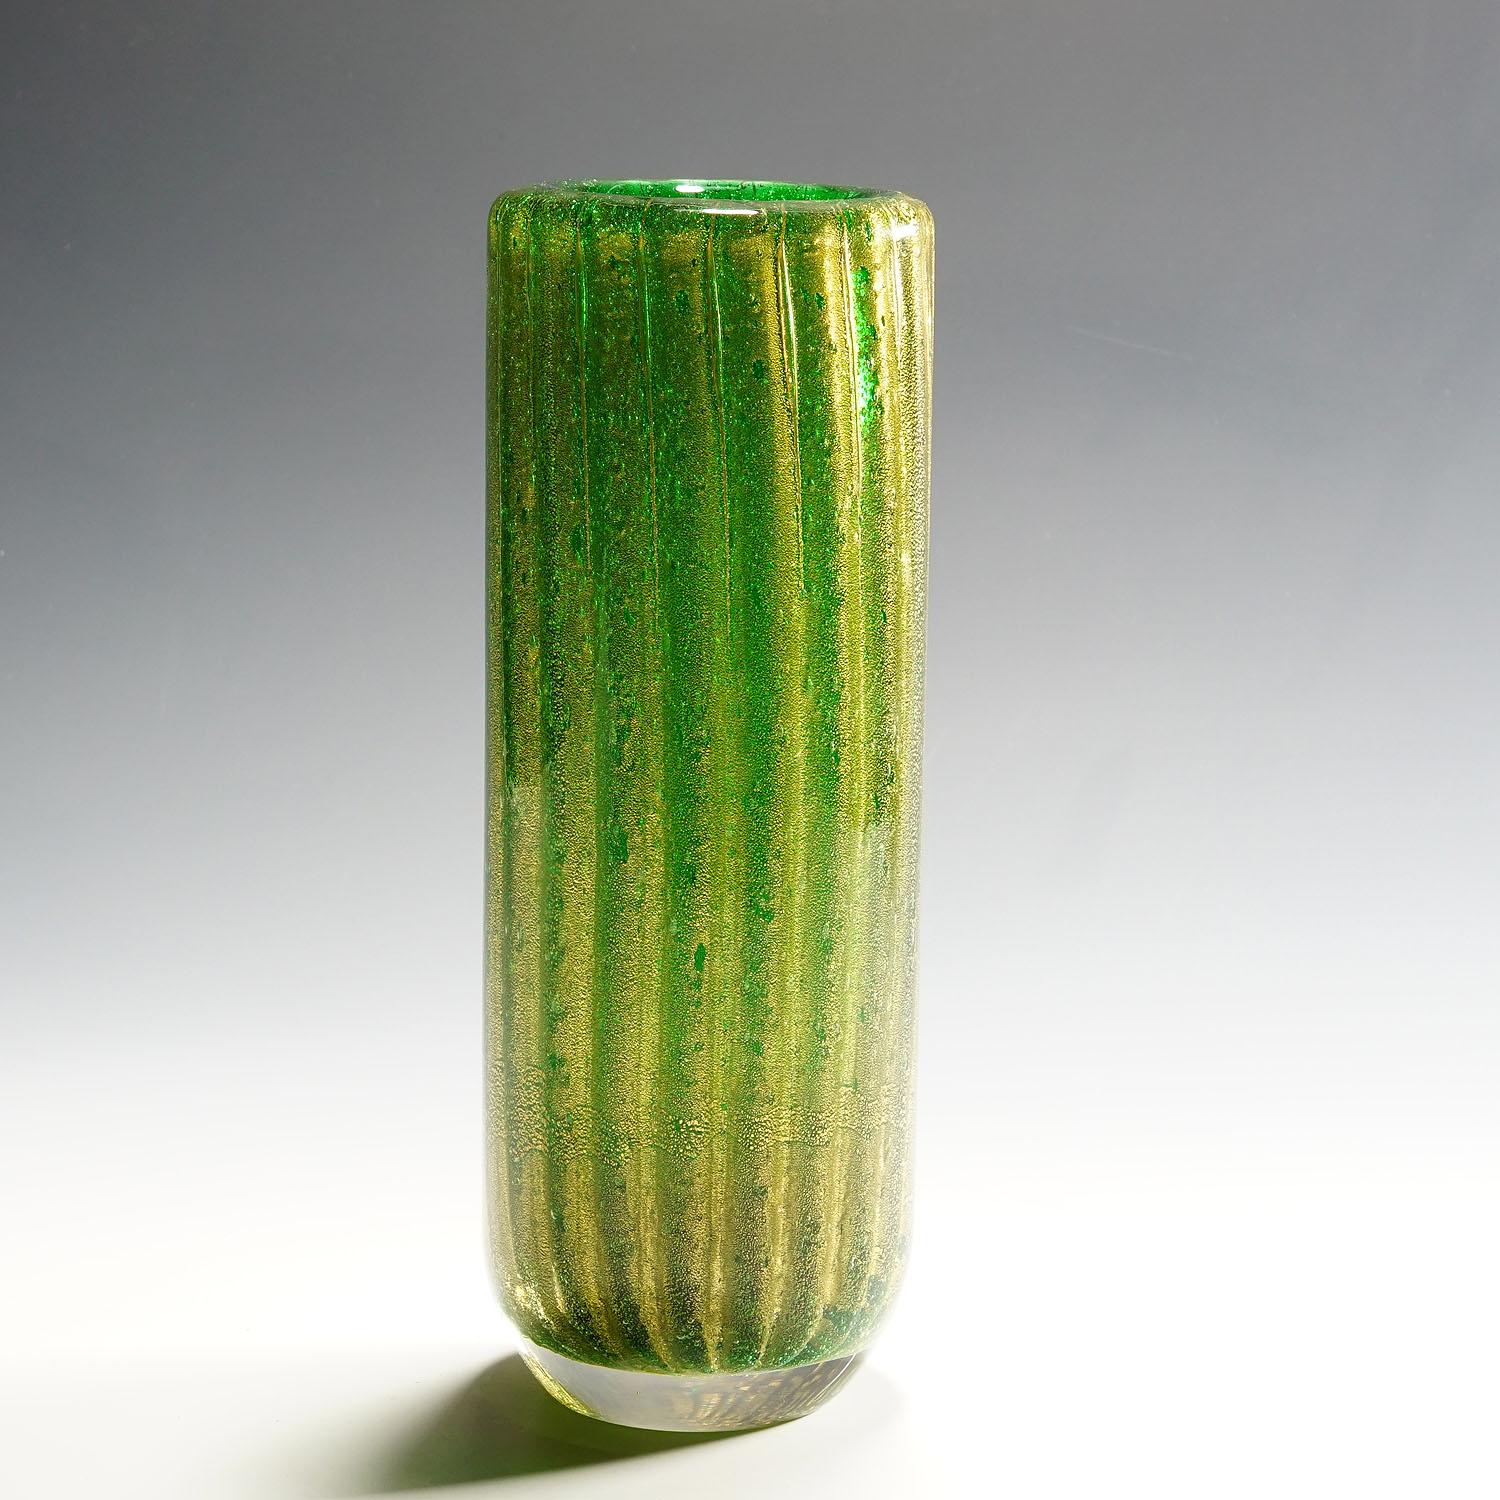 Large Vetro Sommerso Vase by Carlo Scarpa for Venini Murano, circa 1930s.

A large vetro sommerso bollicine vase designed by Carlo Scarpa between 1934 and 1936. Manufactured by Venini Murano Venice in the 1930s. Thick green glass with multiple air